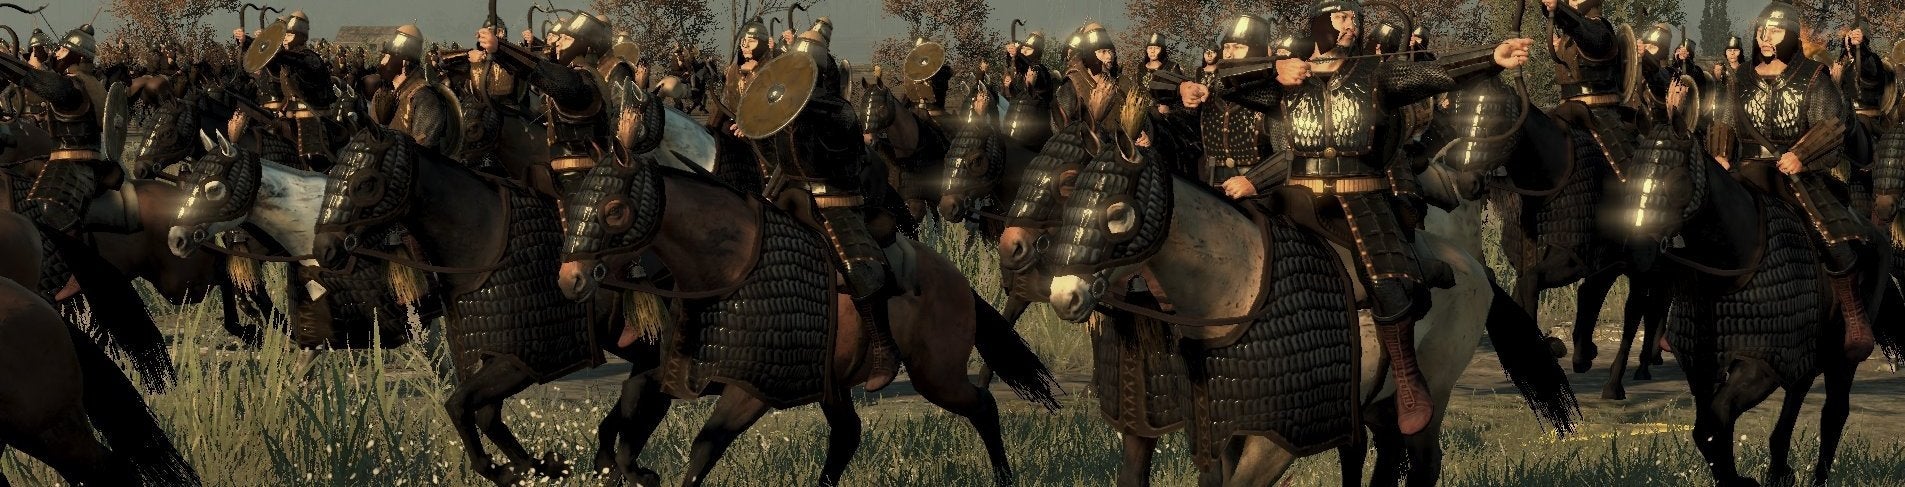 Image for The broadening horizons of Total War